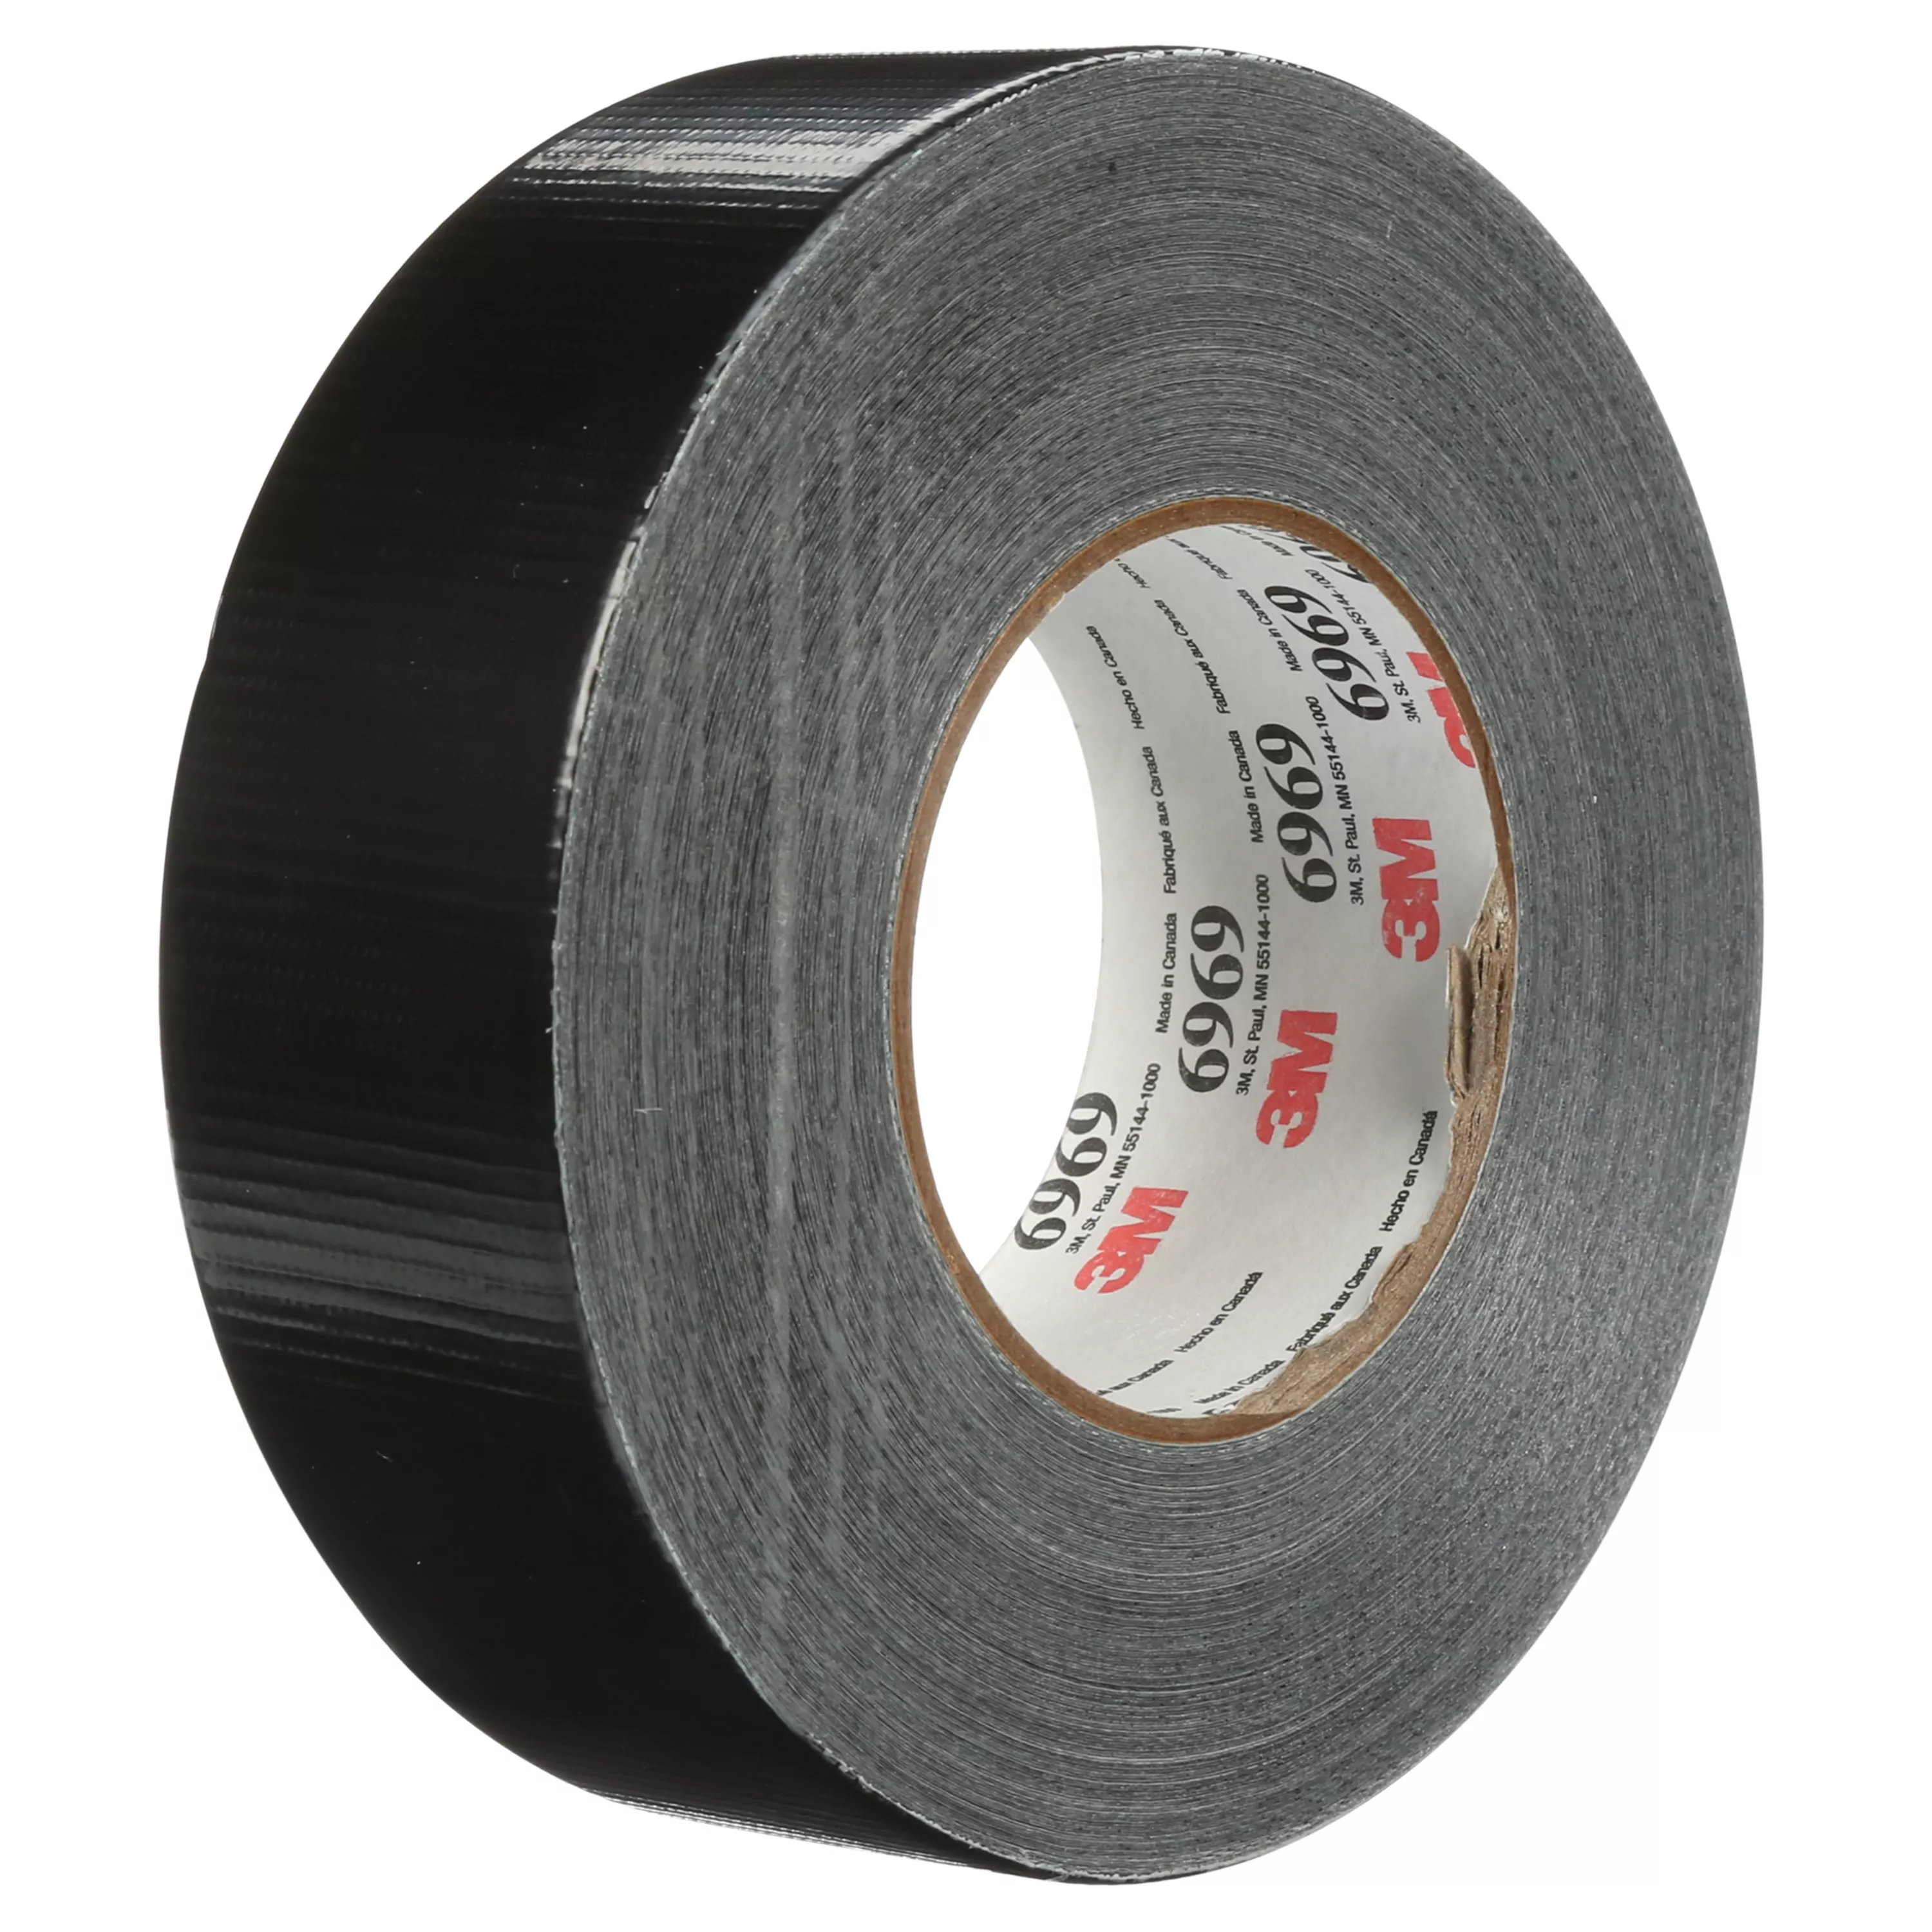 3M™ Extra Heavy Duty Duct Tape 6969, Black, 48 mm x 54.8 m, 10.7 mil, 24
Roll/Case, Individually Wrapped Conveniently Packaged